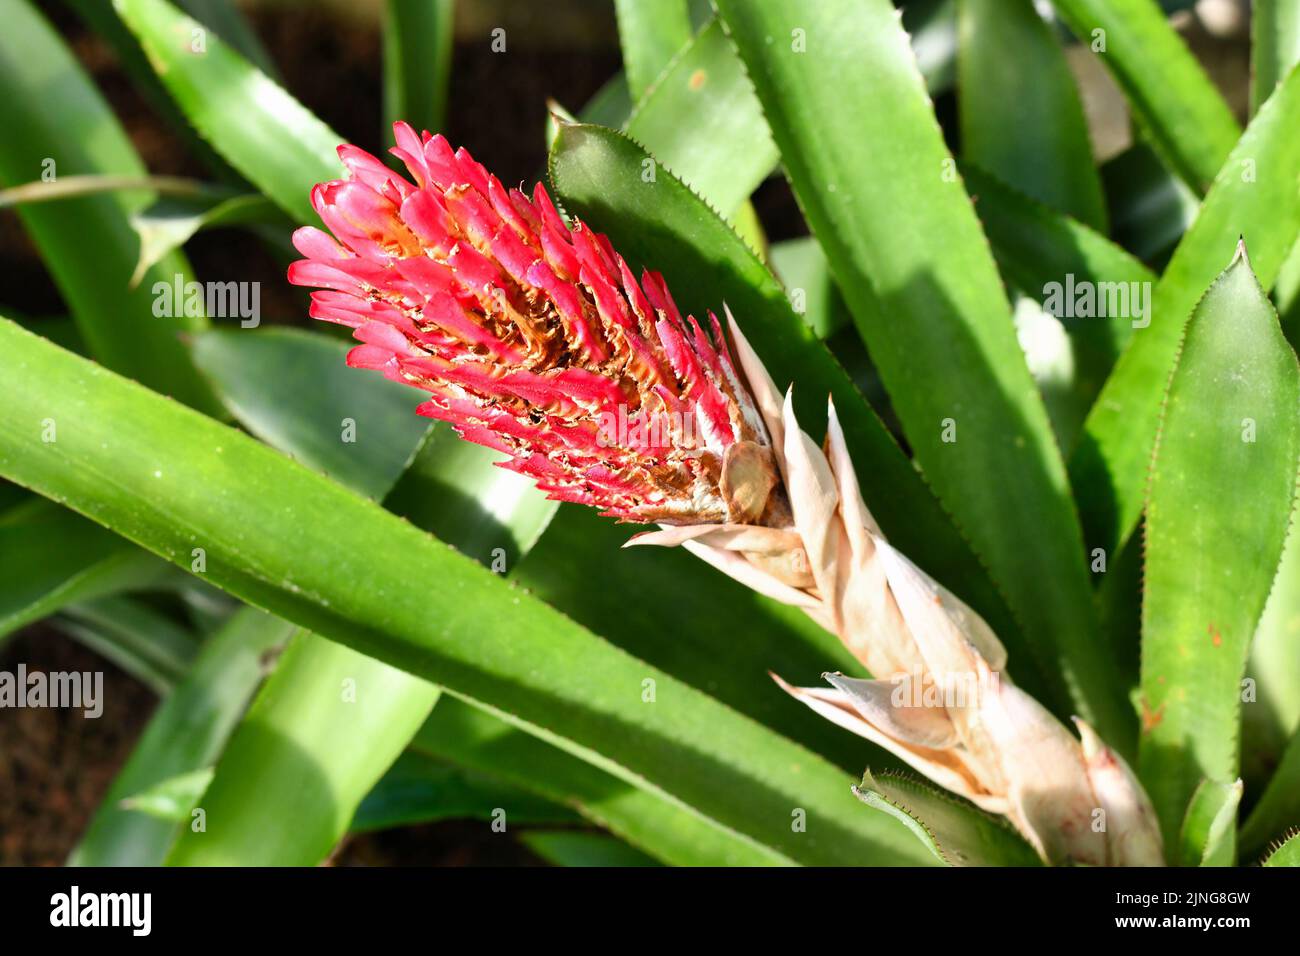 Blooming red flower of tropical 'Quesnelia Quesneliana' plant Stock Photo